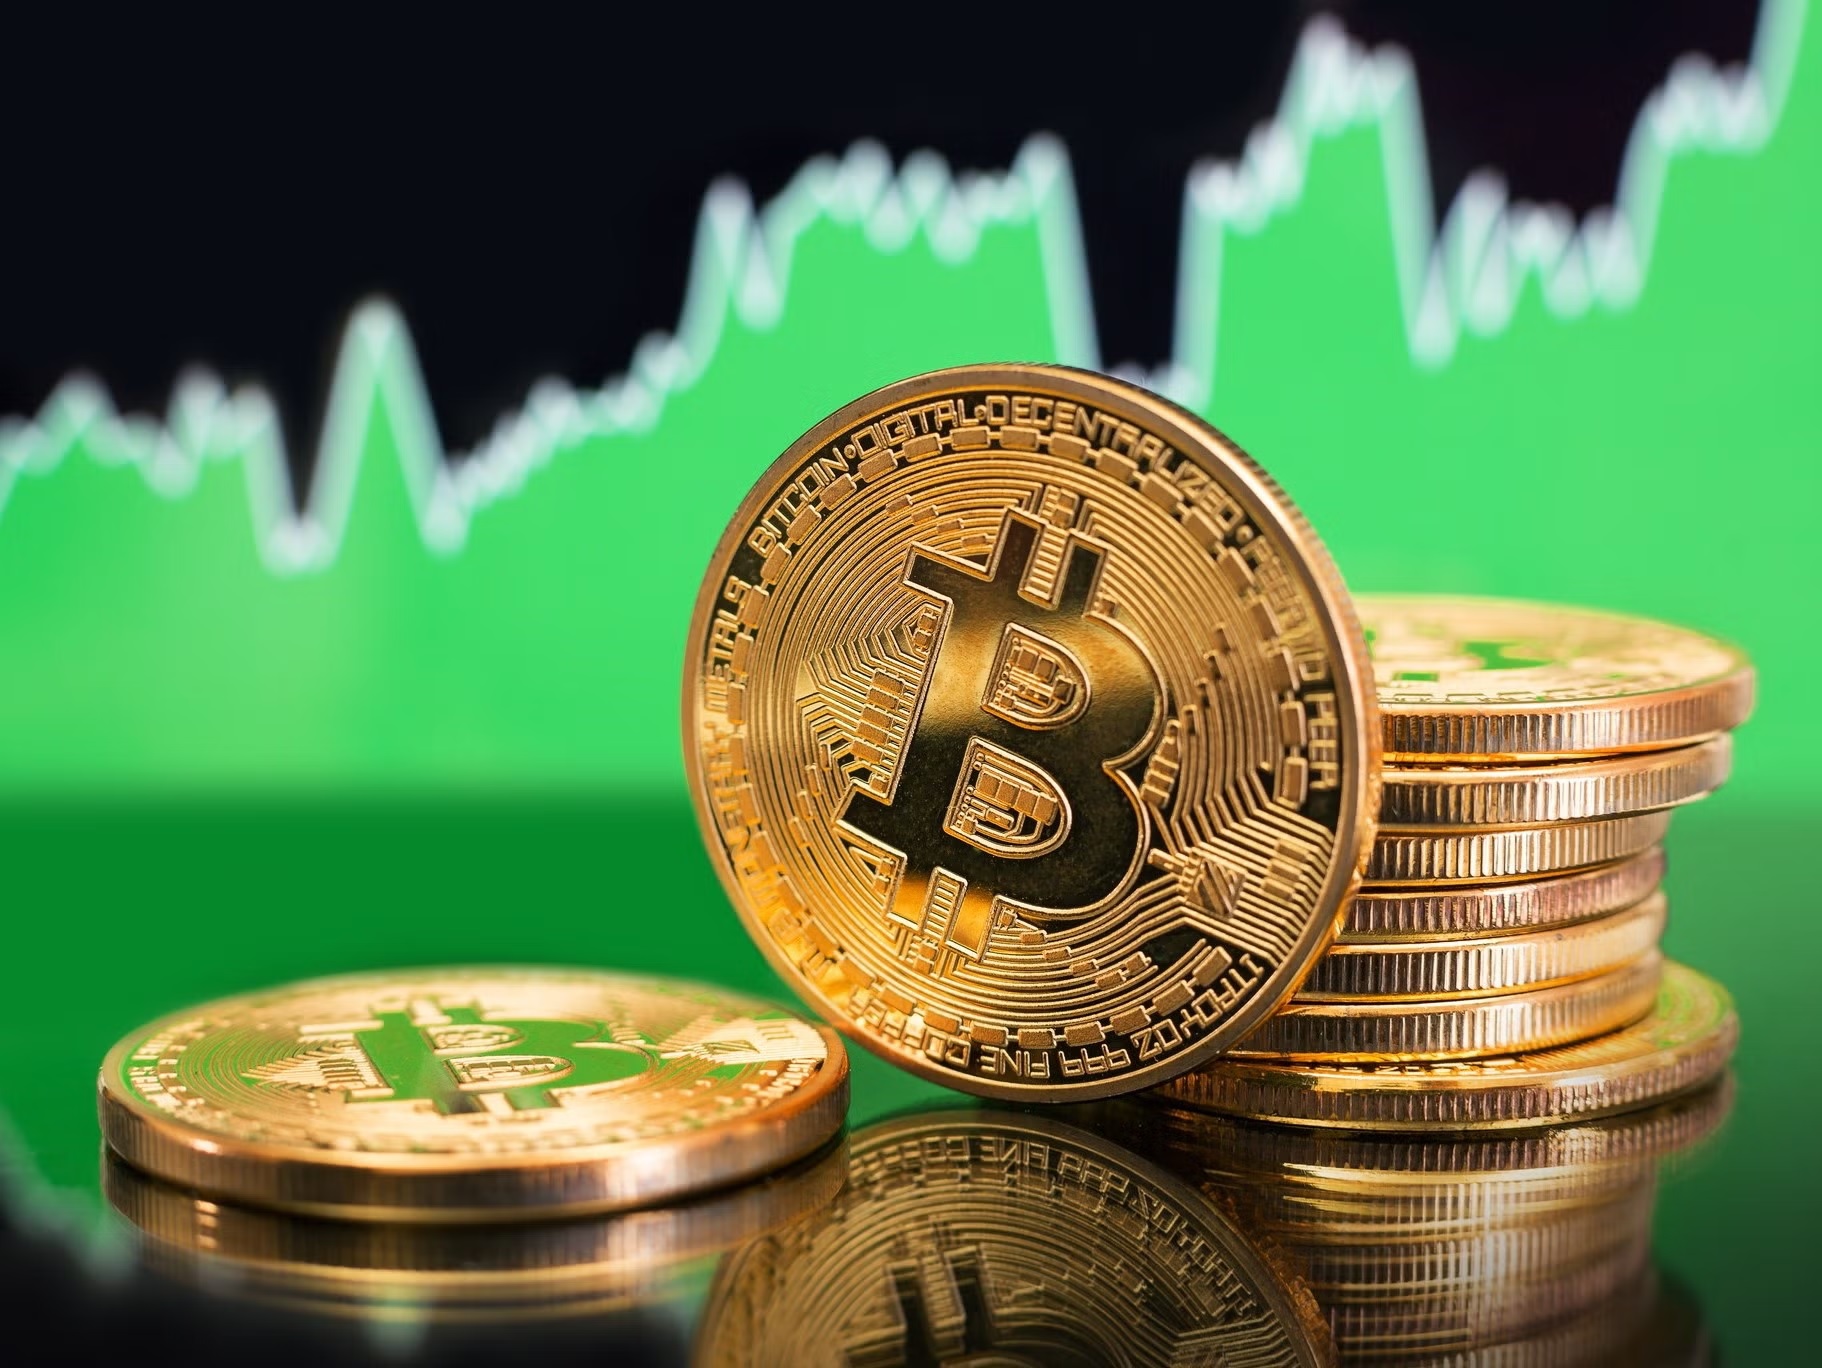 The analyst shared the new level that he claimed would bring an increase in Bitcoin, the world`s largest cryptocurrency. Continue Reading: What Will Happen to Bitcoin Price in the Future? Analyst Explains the Condition for BTC to Rise Above $66,000 Again